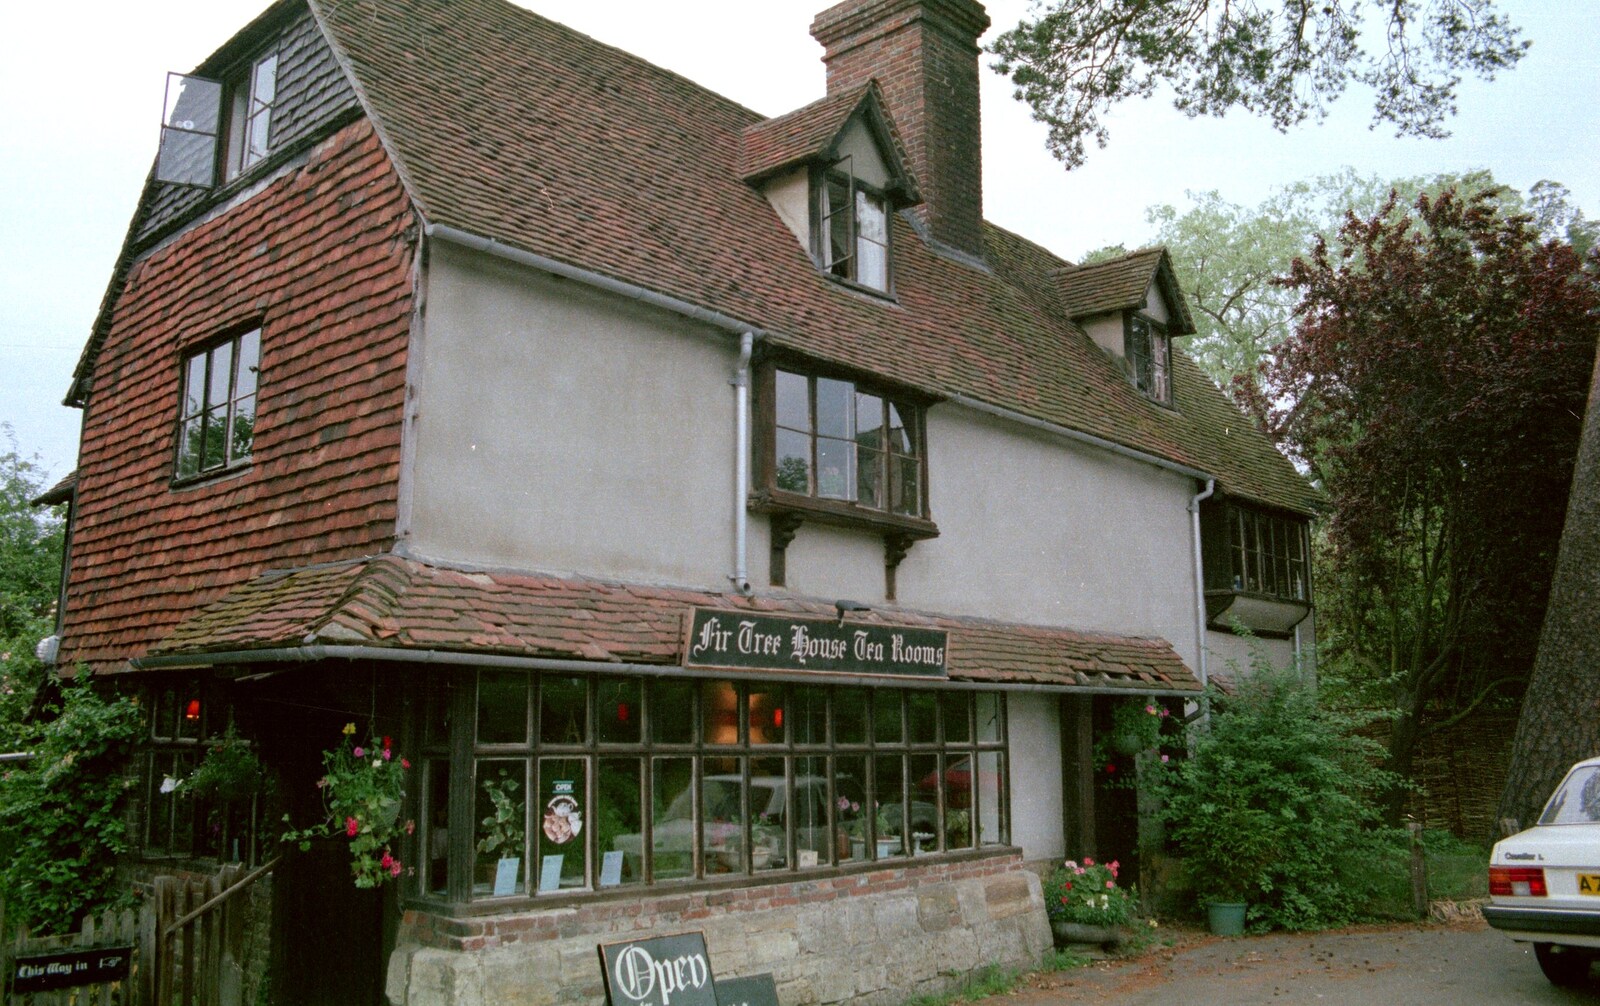 The Fir Tree House tea rooms from A Trip to Groombridge, Kent - 10th July 1986